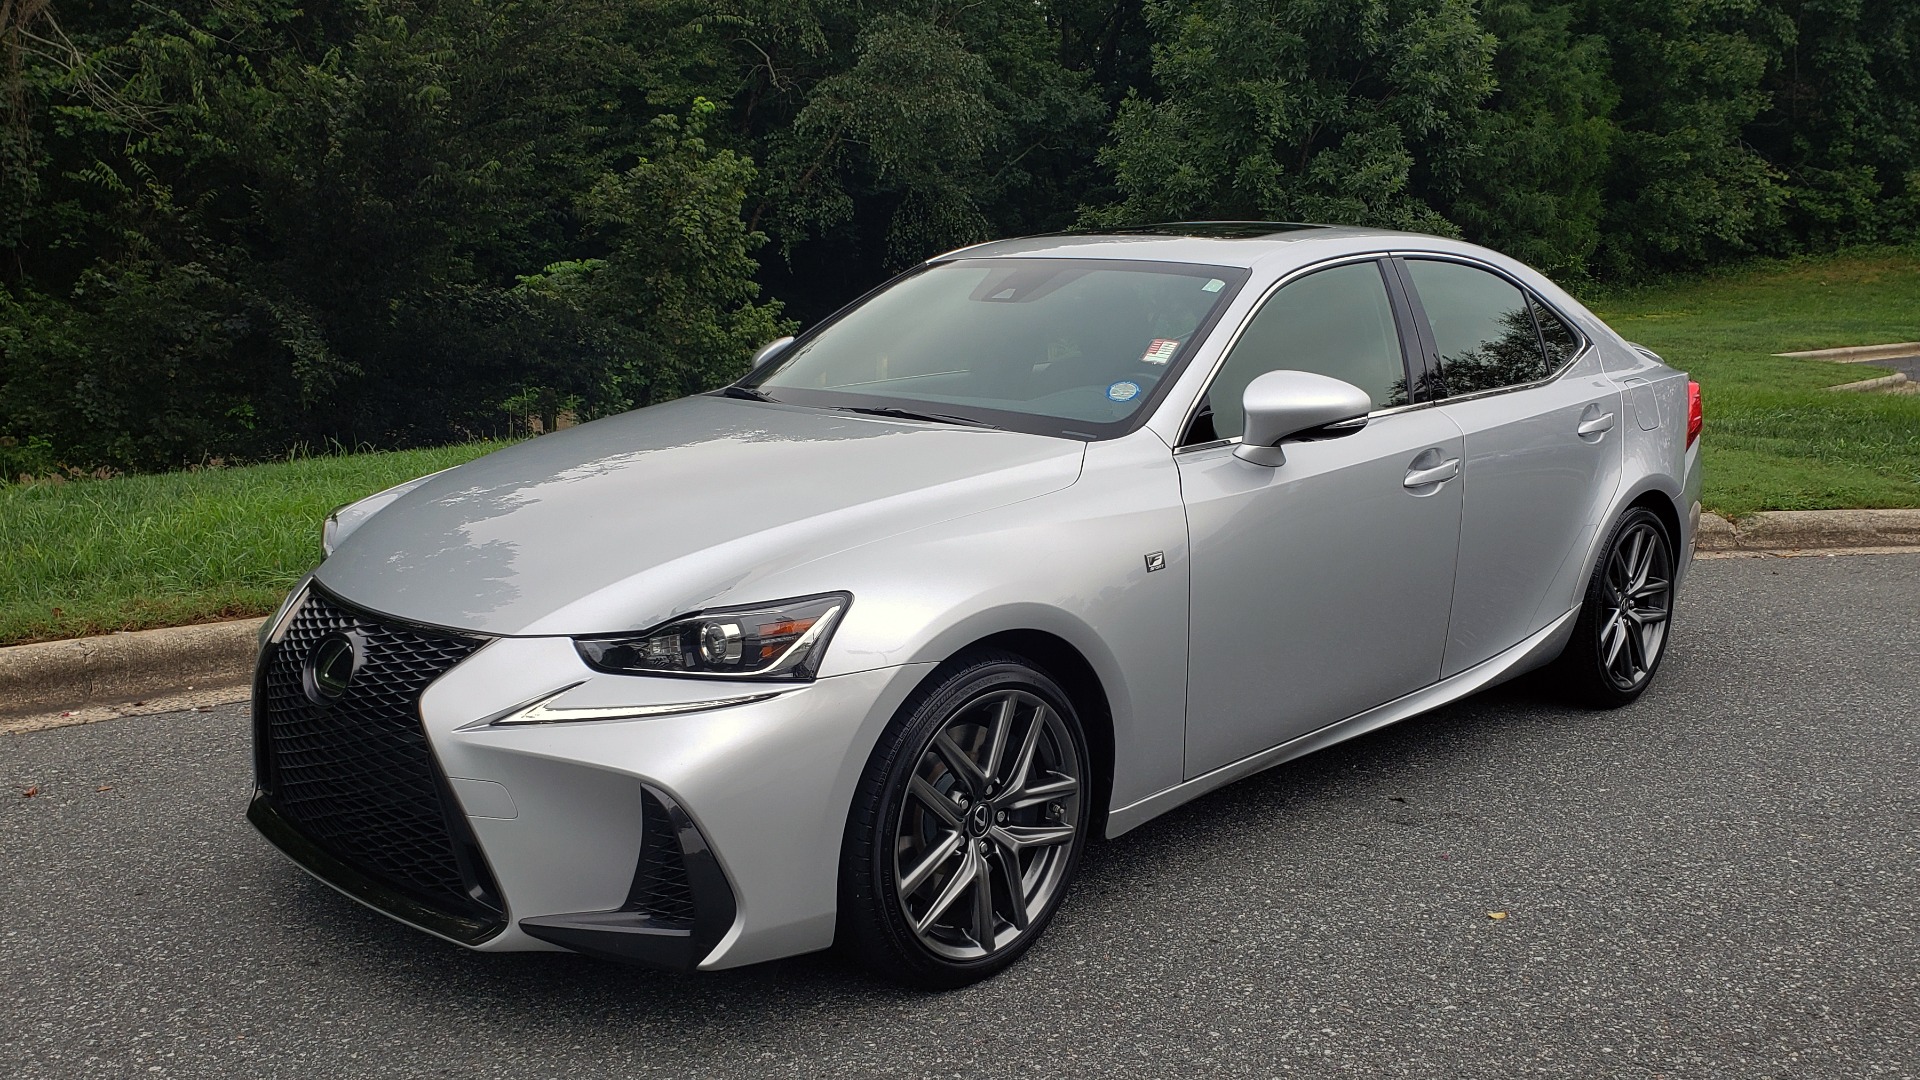 Used 2017 Lexus IS 200T F-SPORT / LEATHER / SUNROOF / 18IN WHEELS / REARVIEW for sale Sold at Formula Imports in Charlotte NC 28227 2